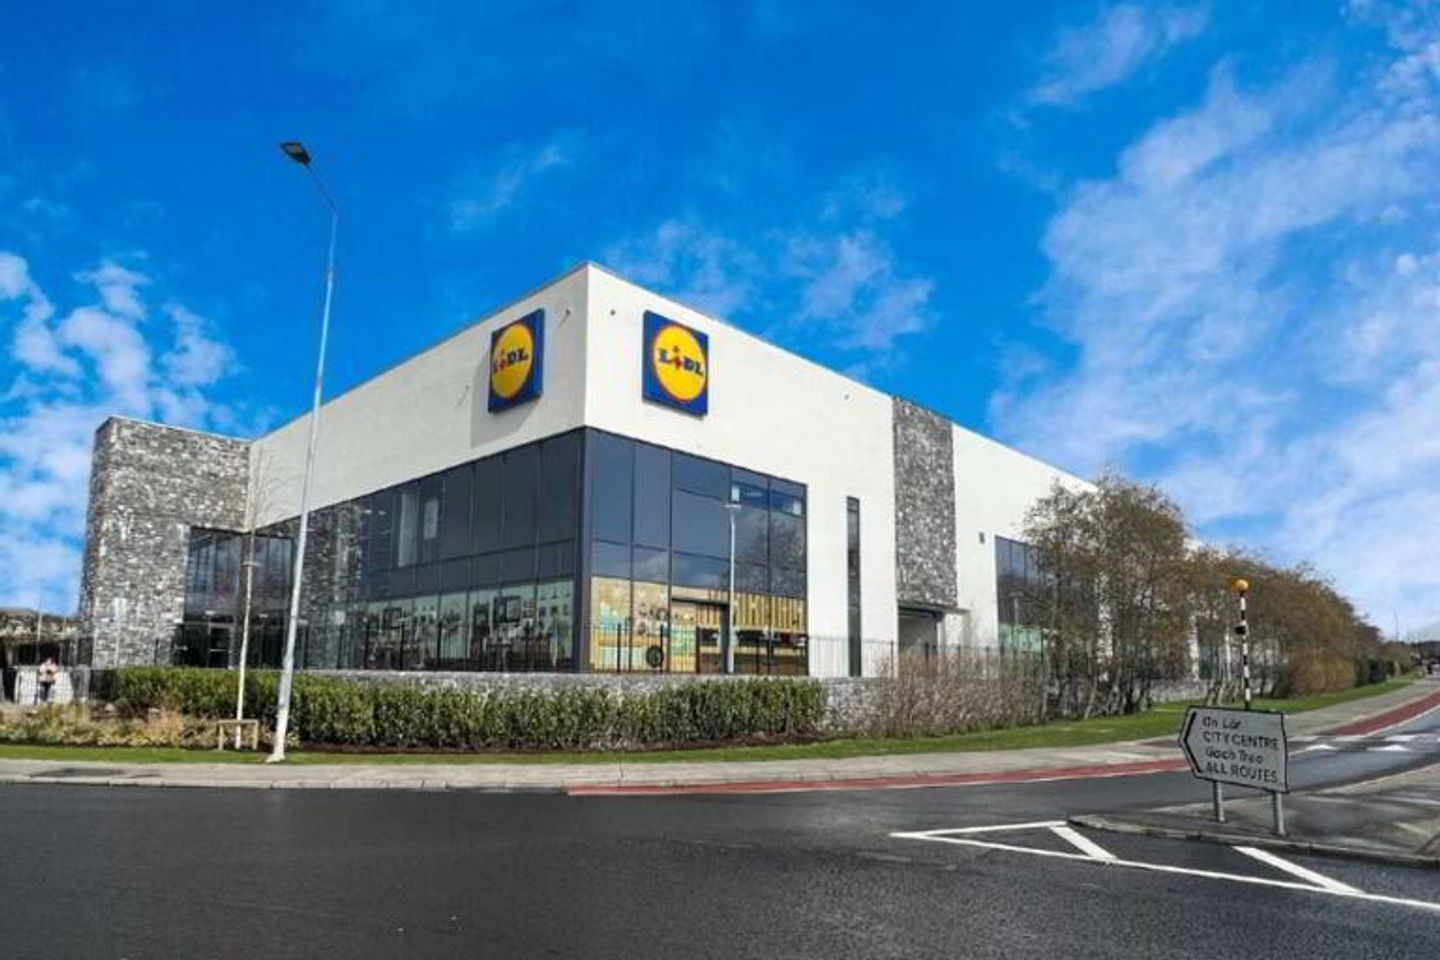 Retail Units At Lidl Retail Development, Western Distributor Road, Knocknacarra, Co. Galway